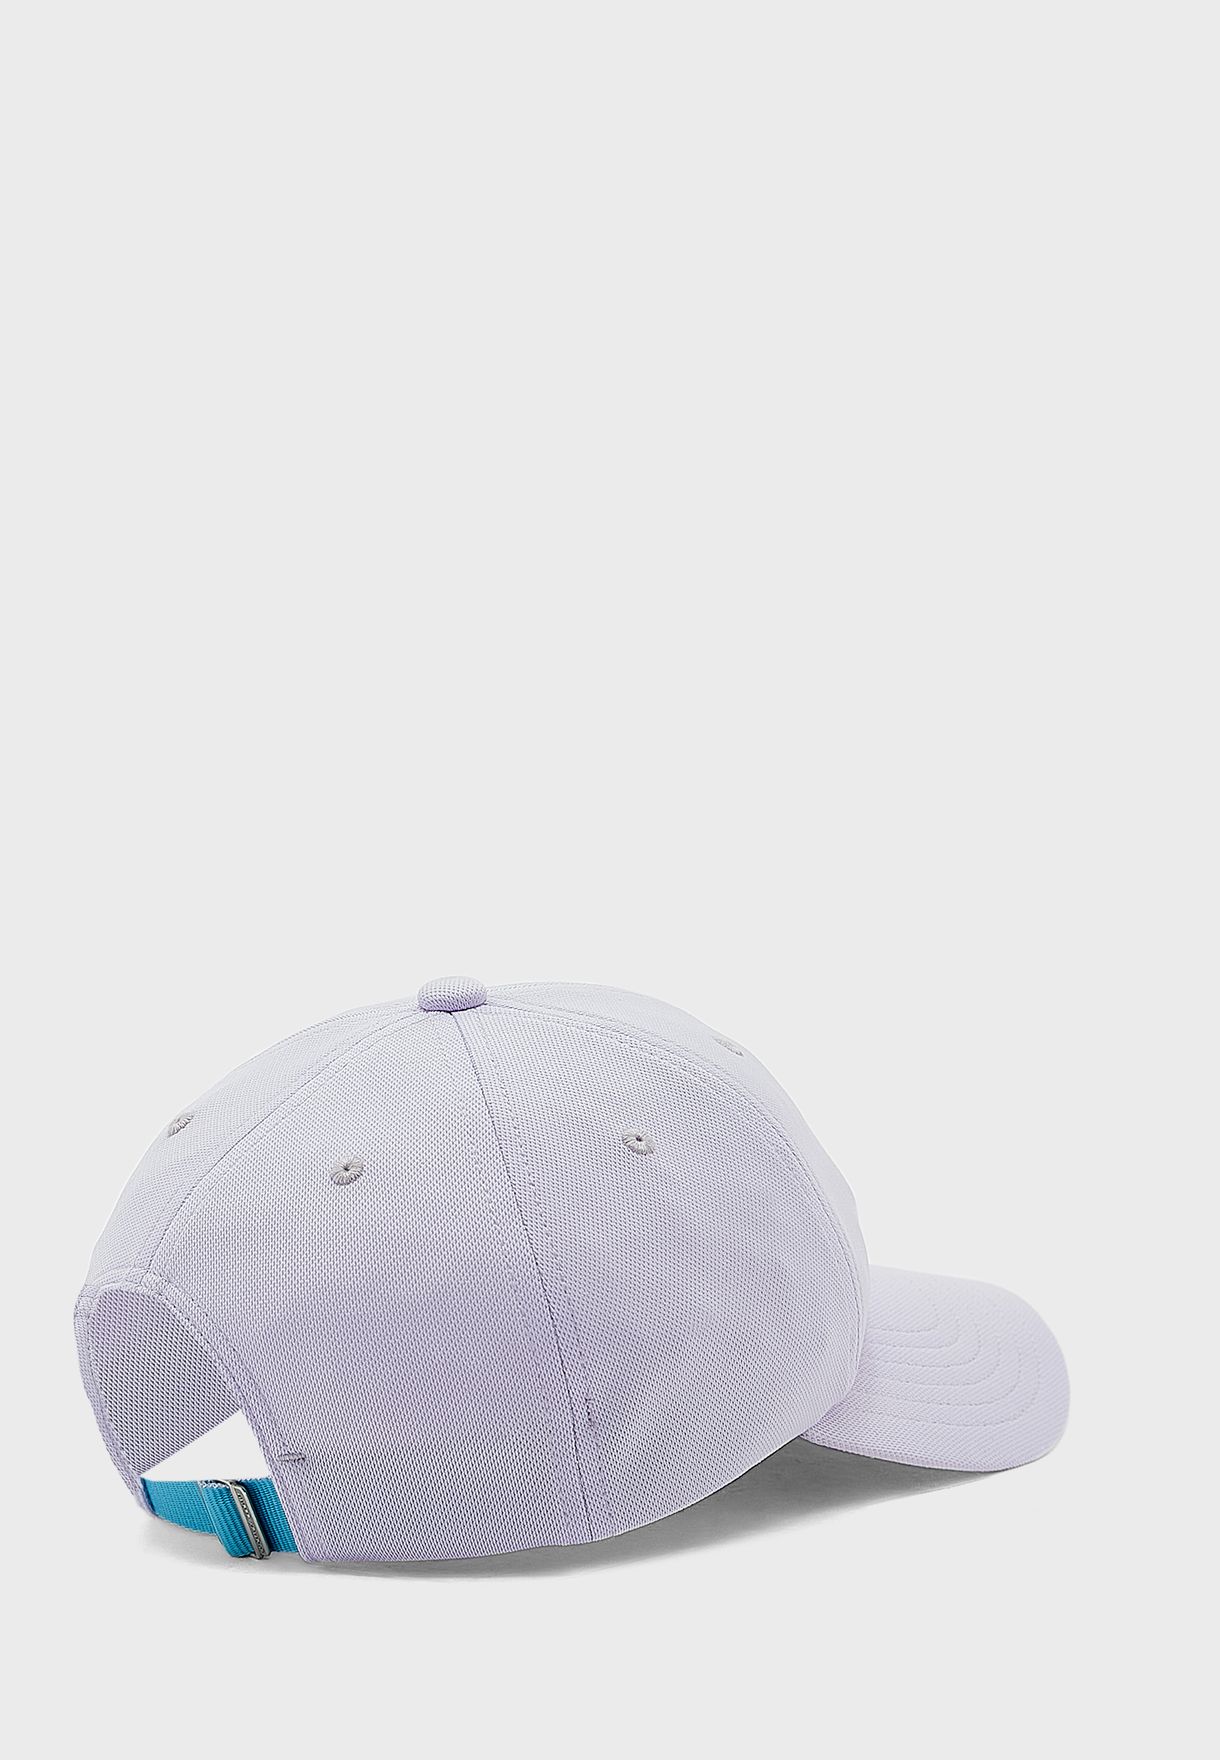 Youth Blitzing Adjustable Cap